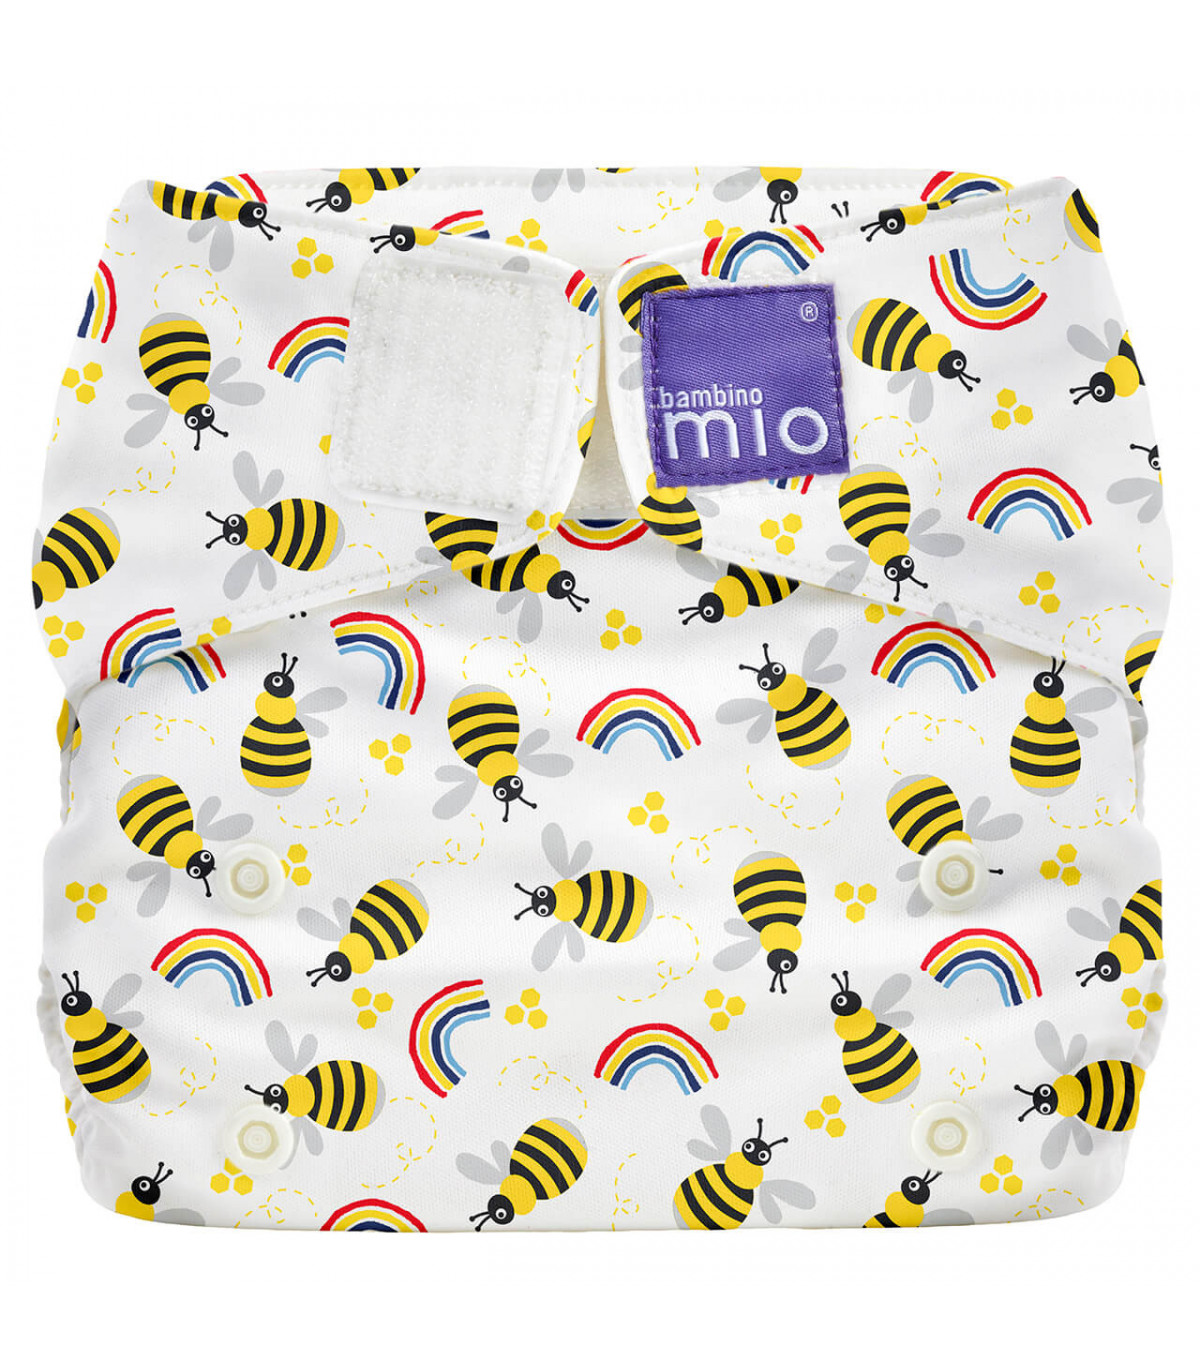 All-In-One Honeybee Reusable Nappy for a clean Bum